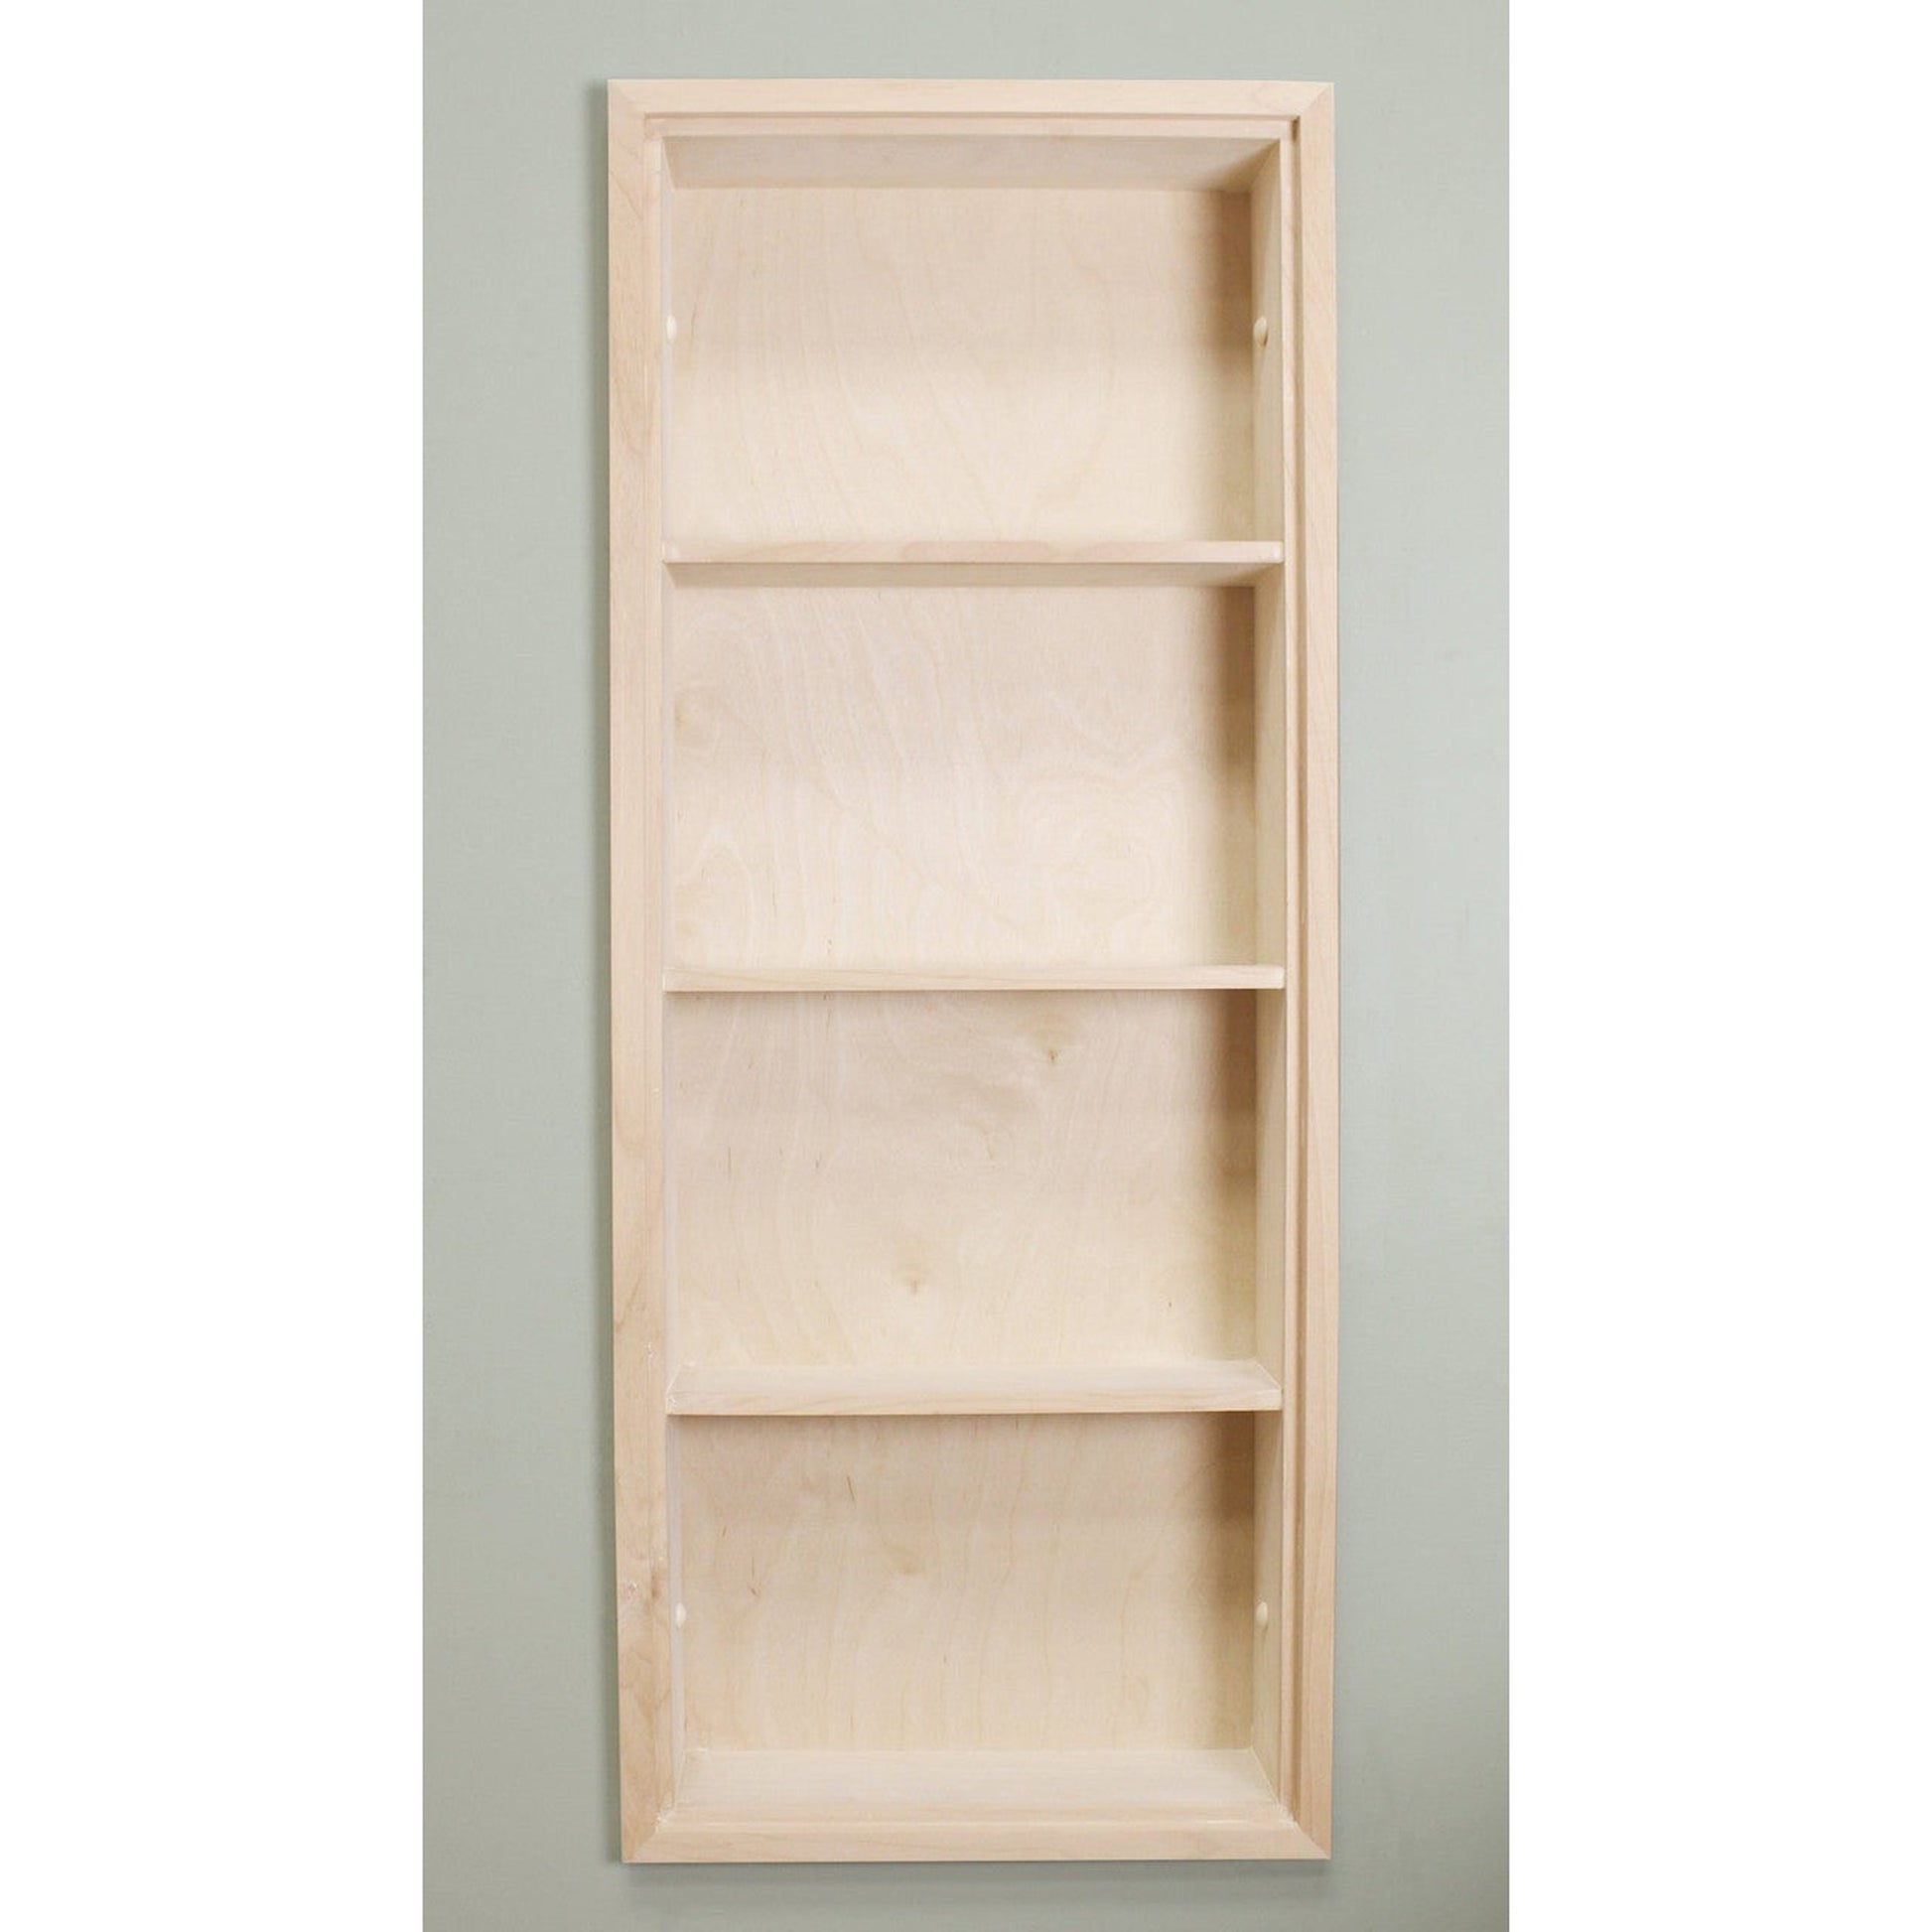 Fox Hollow Furnishings Aiden 14" x 36" Unfinished Recessed Sloane Wall Niche With Plain Back and Three Shelves